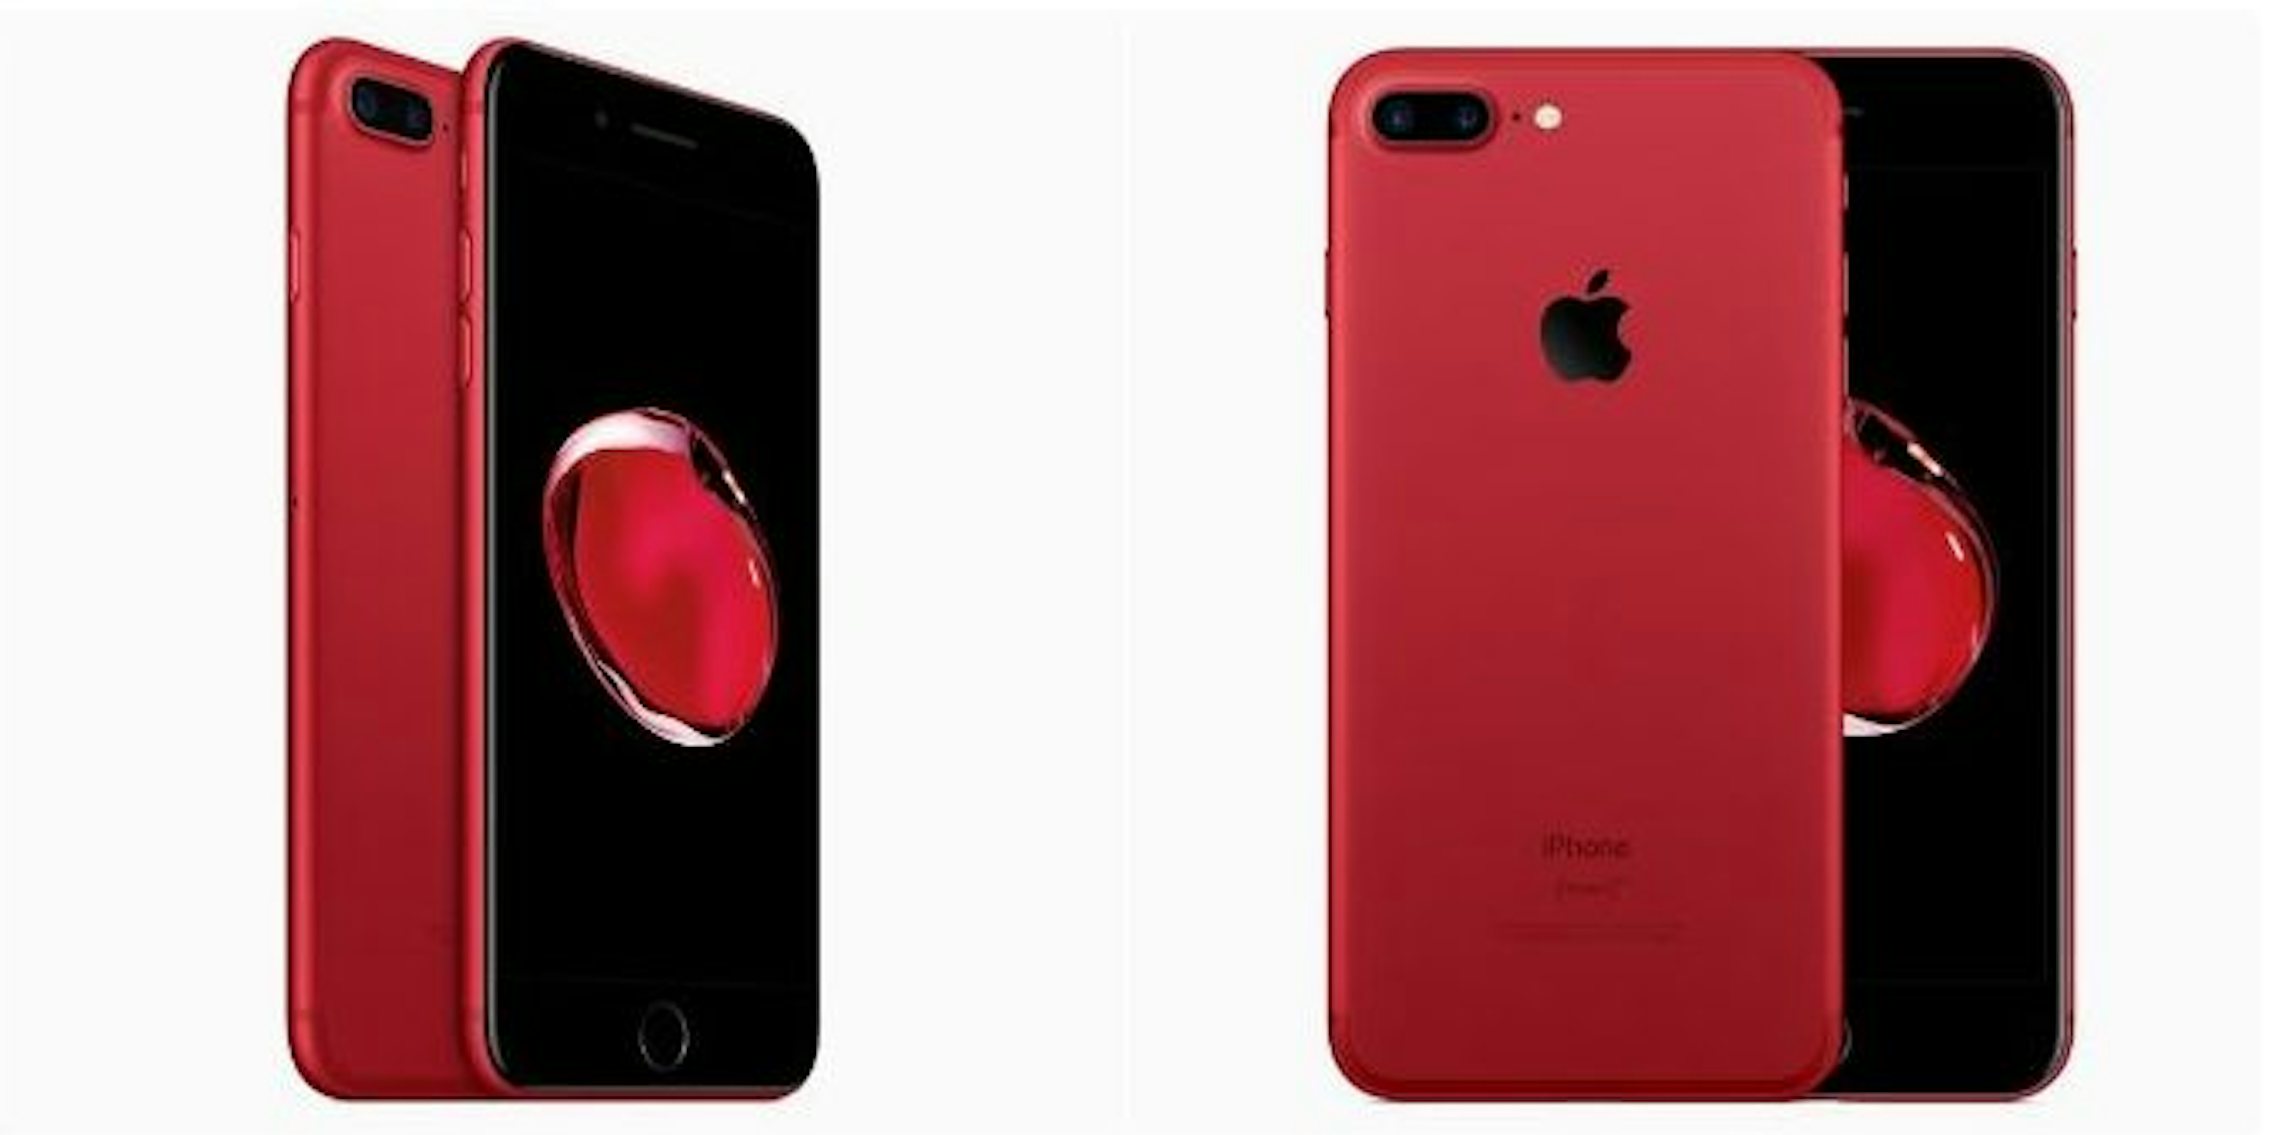 red iphone 7: red with black front